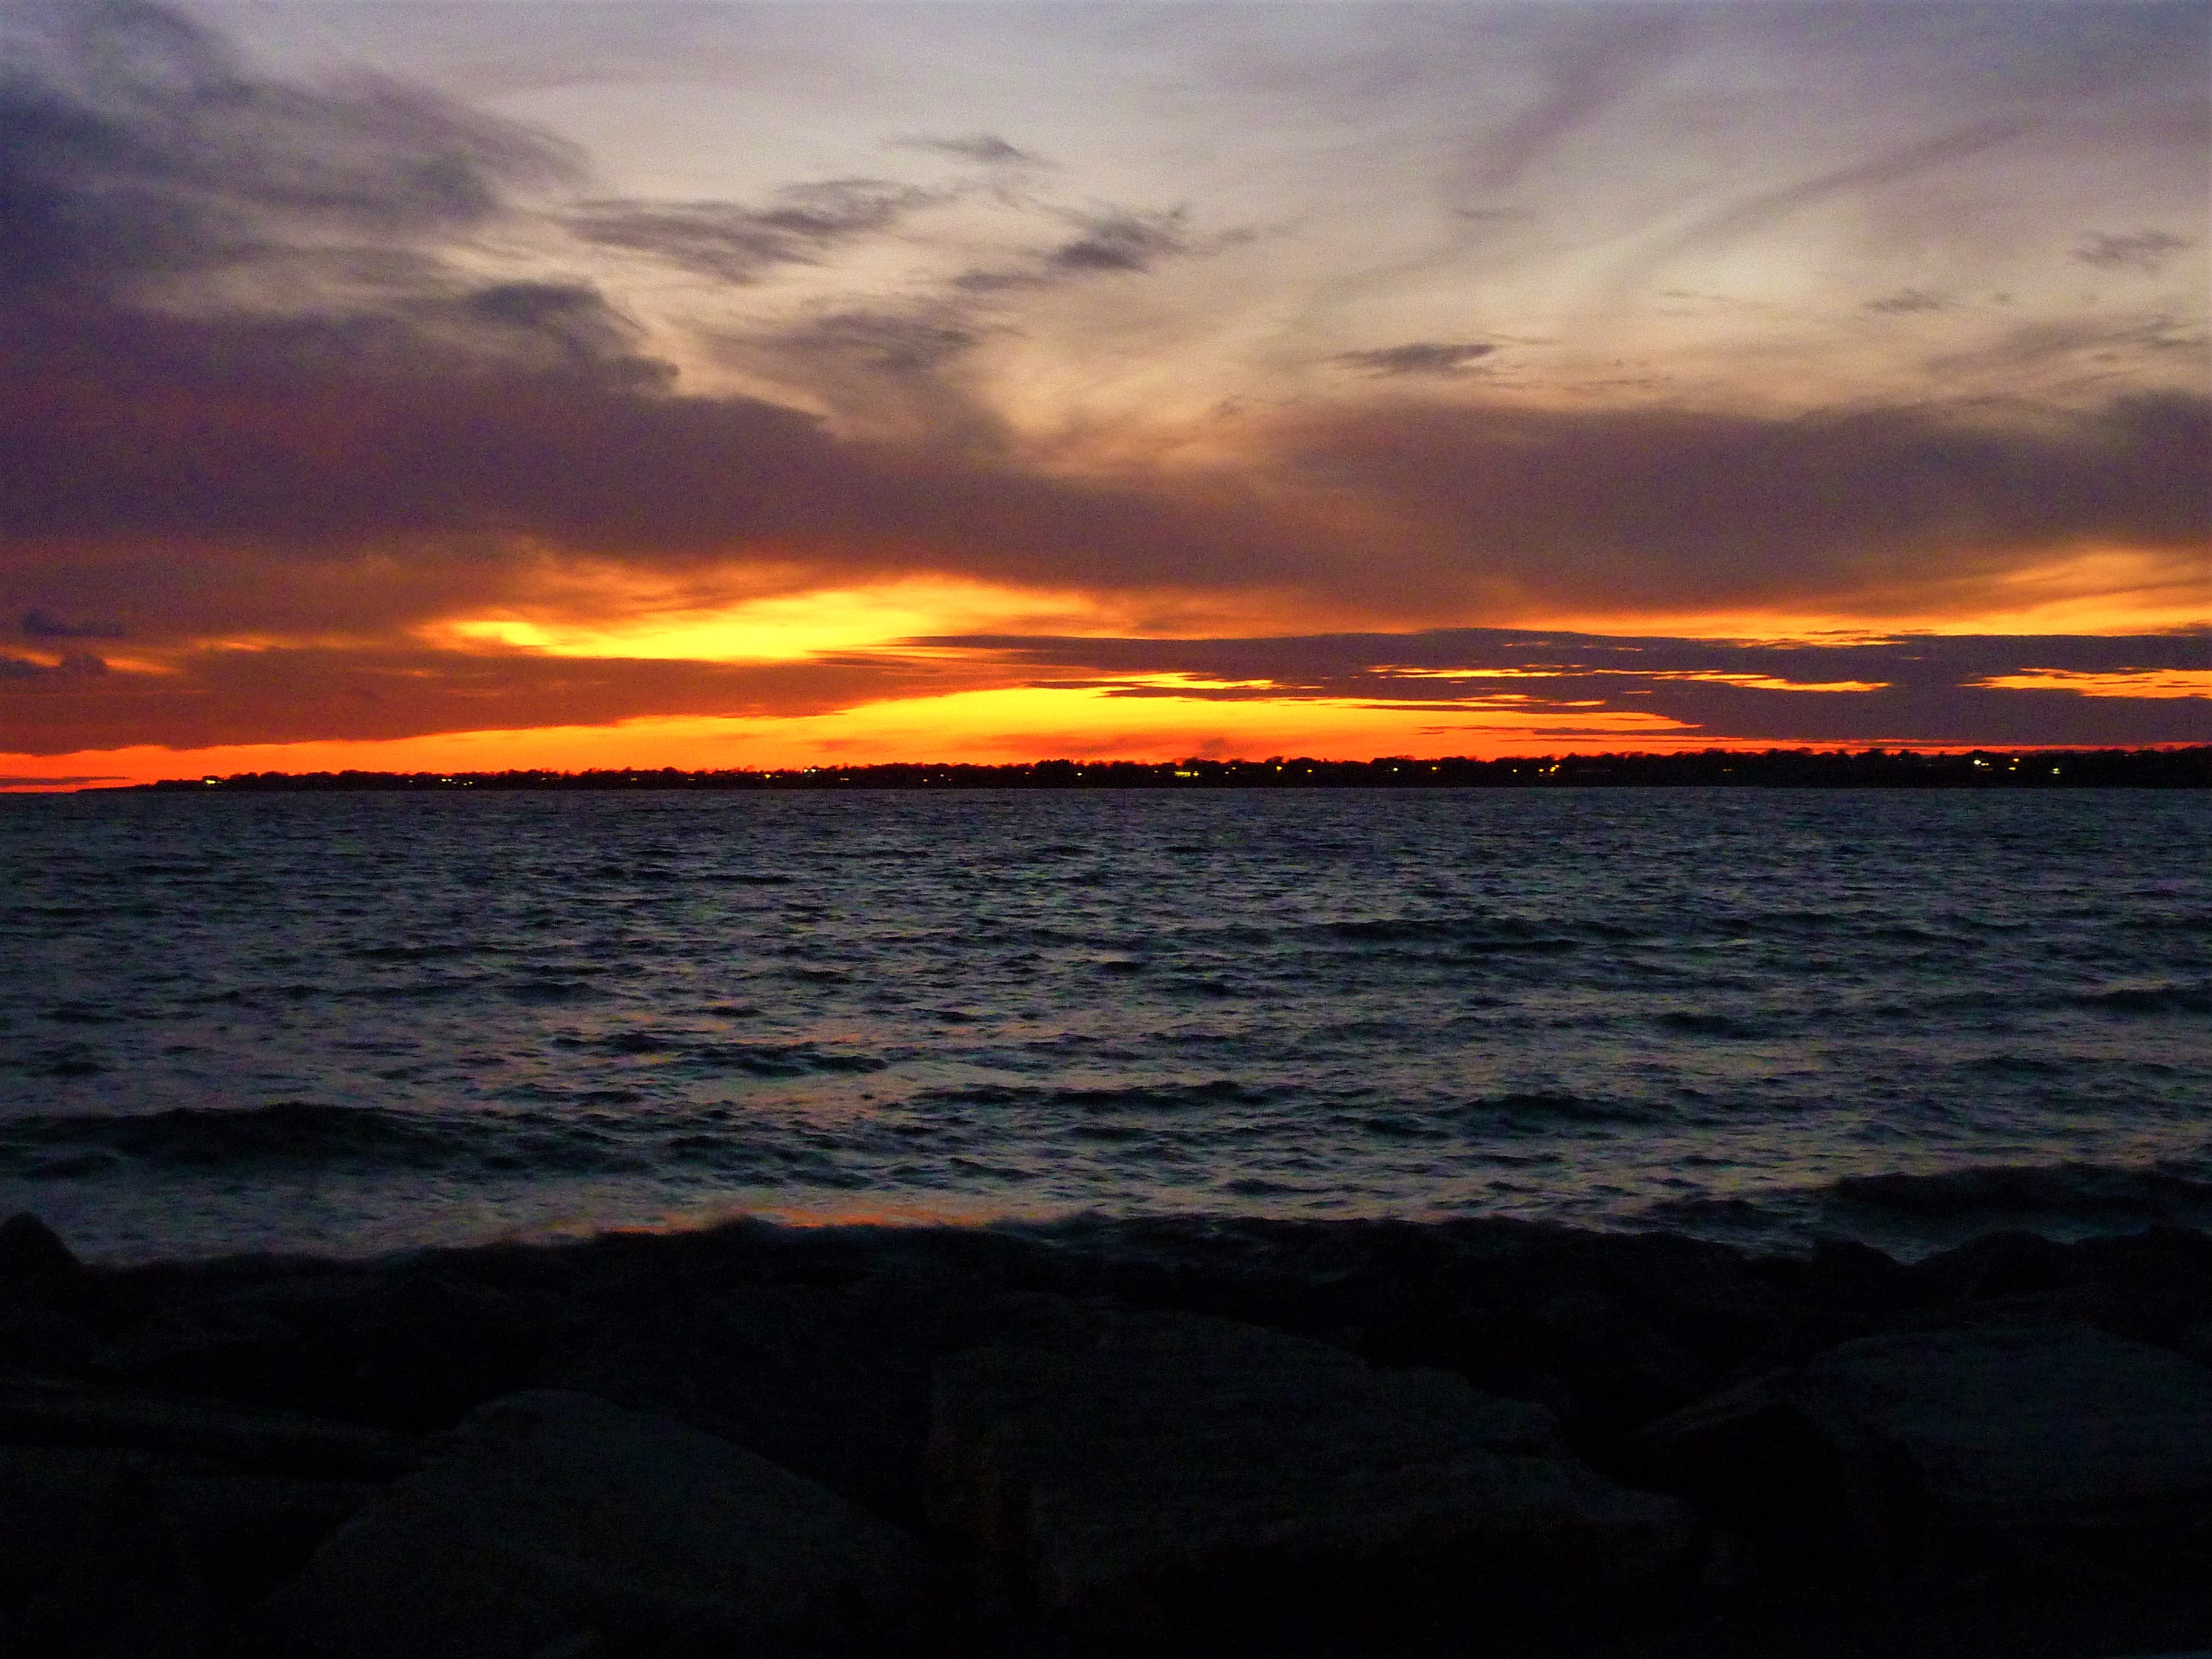 Sunset in November at Sachuest Point in Middletown, Rhode Island.